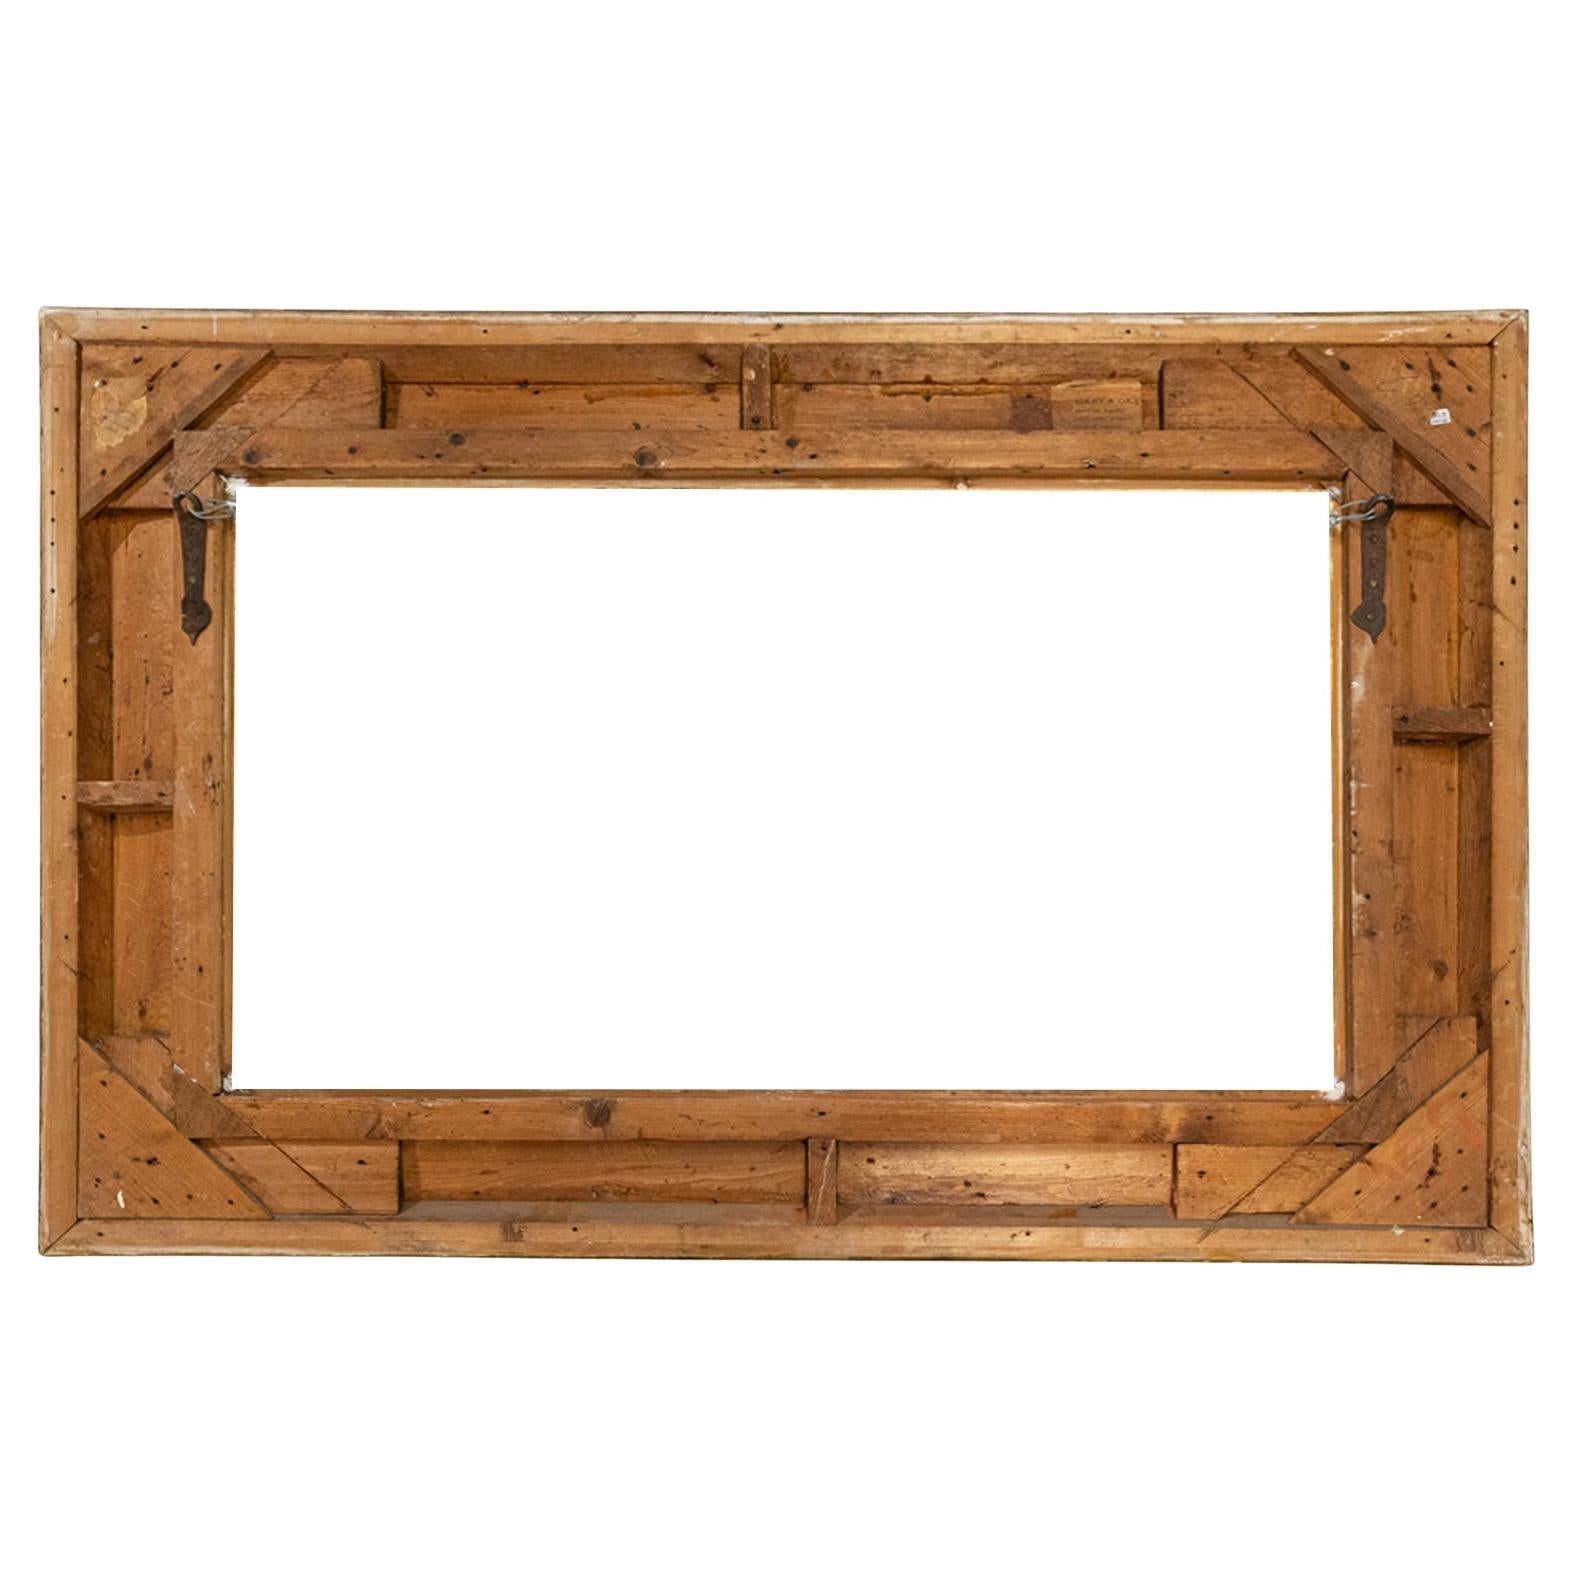 O/6498 - Large rich golden frame, perfect for a mirror or for an important painting.
For a mirror it's better to mount by Yourself, due to transport problems : on request I can do, however.
It's very elegant: it can occupy a wall with its elegance